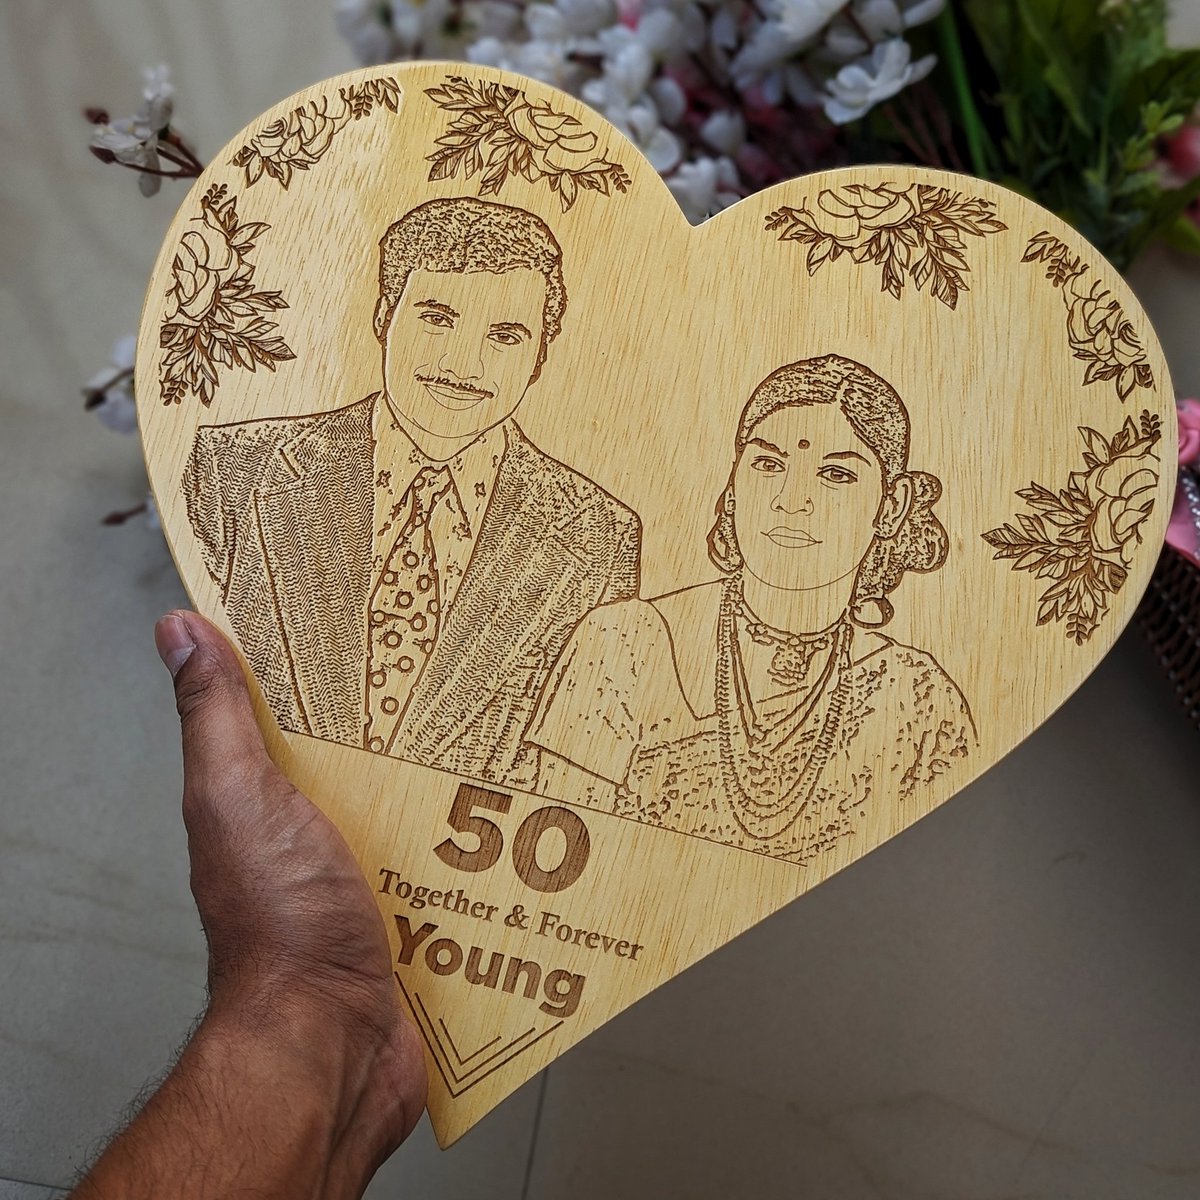 Engrave your love story in the most beautiful way with our personalised wooden frames! 💕 #PersonalisedLove #EngravedFrames #RomanticGifts #LoveStory #anniversarygifts #giftsforcouples #woodgeek #woodgeekstore